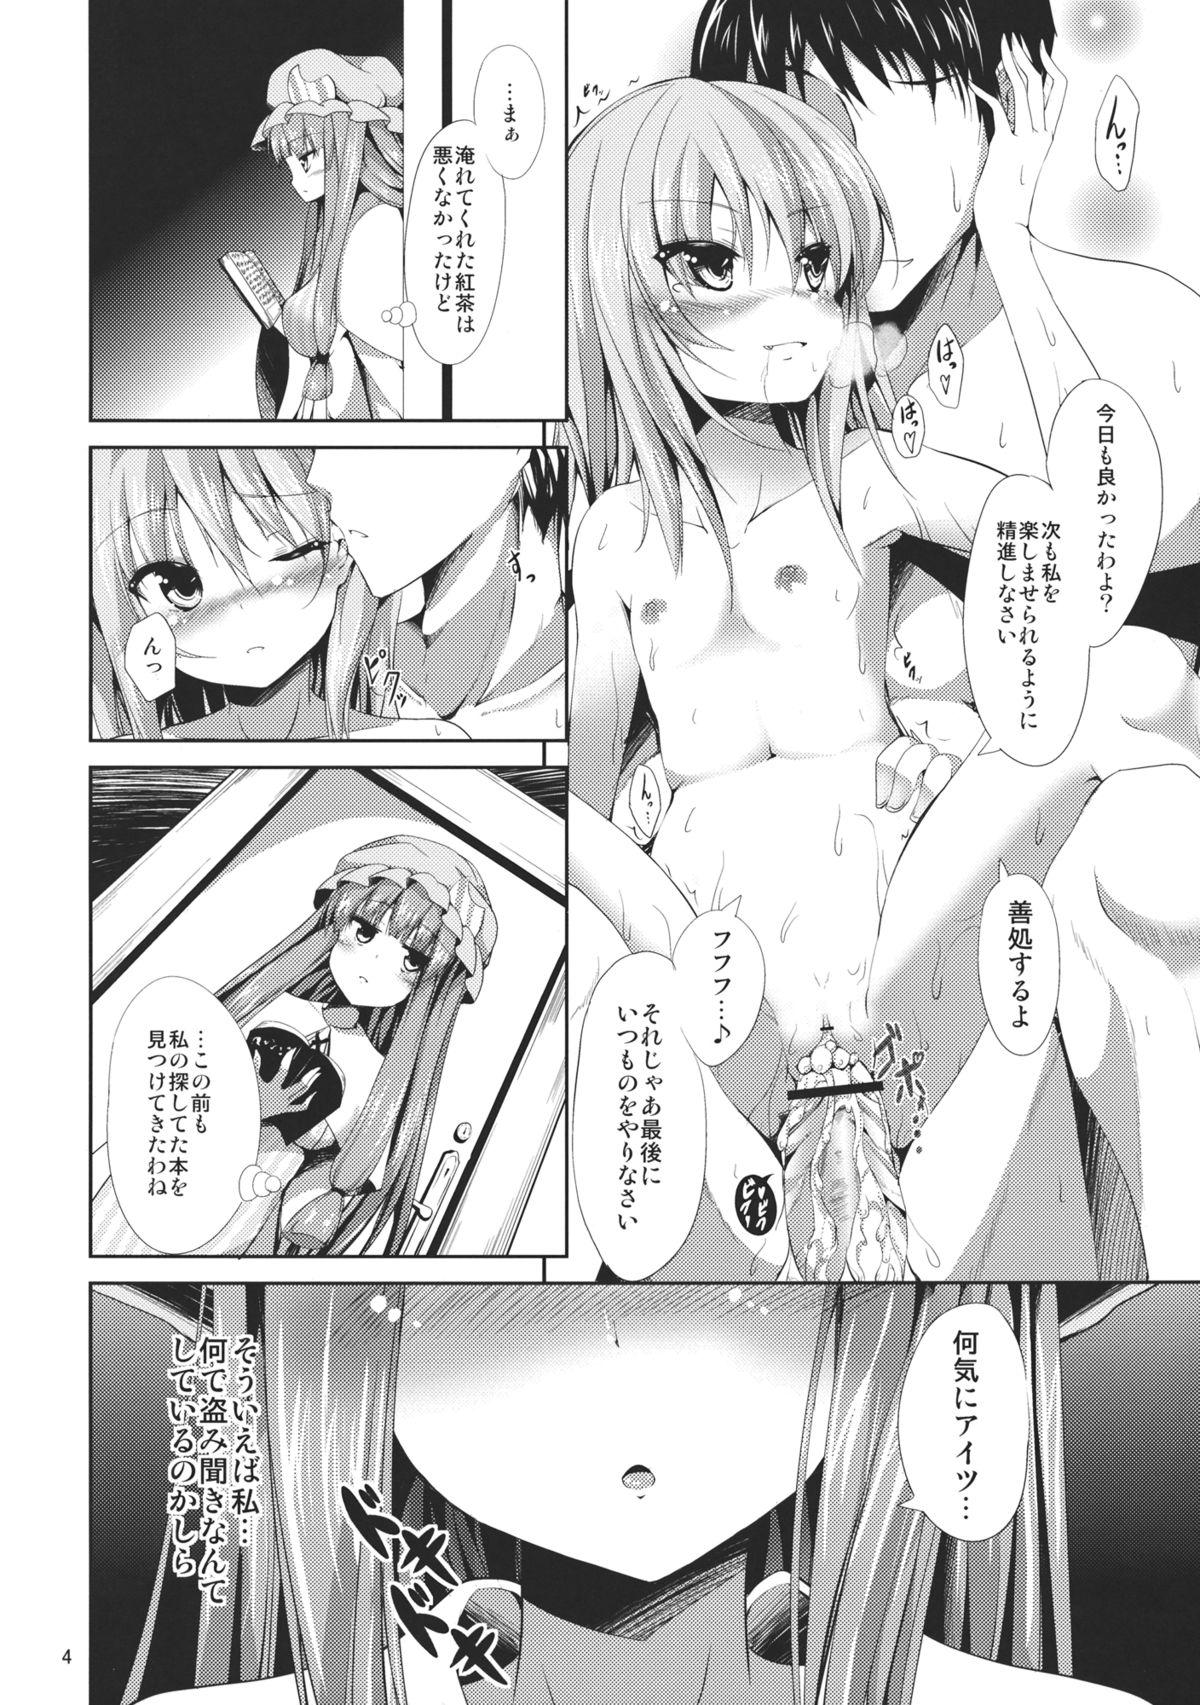 Shaven Sweet nothingS - Touhou project Hottie - Page 4